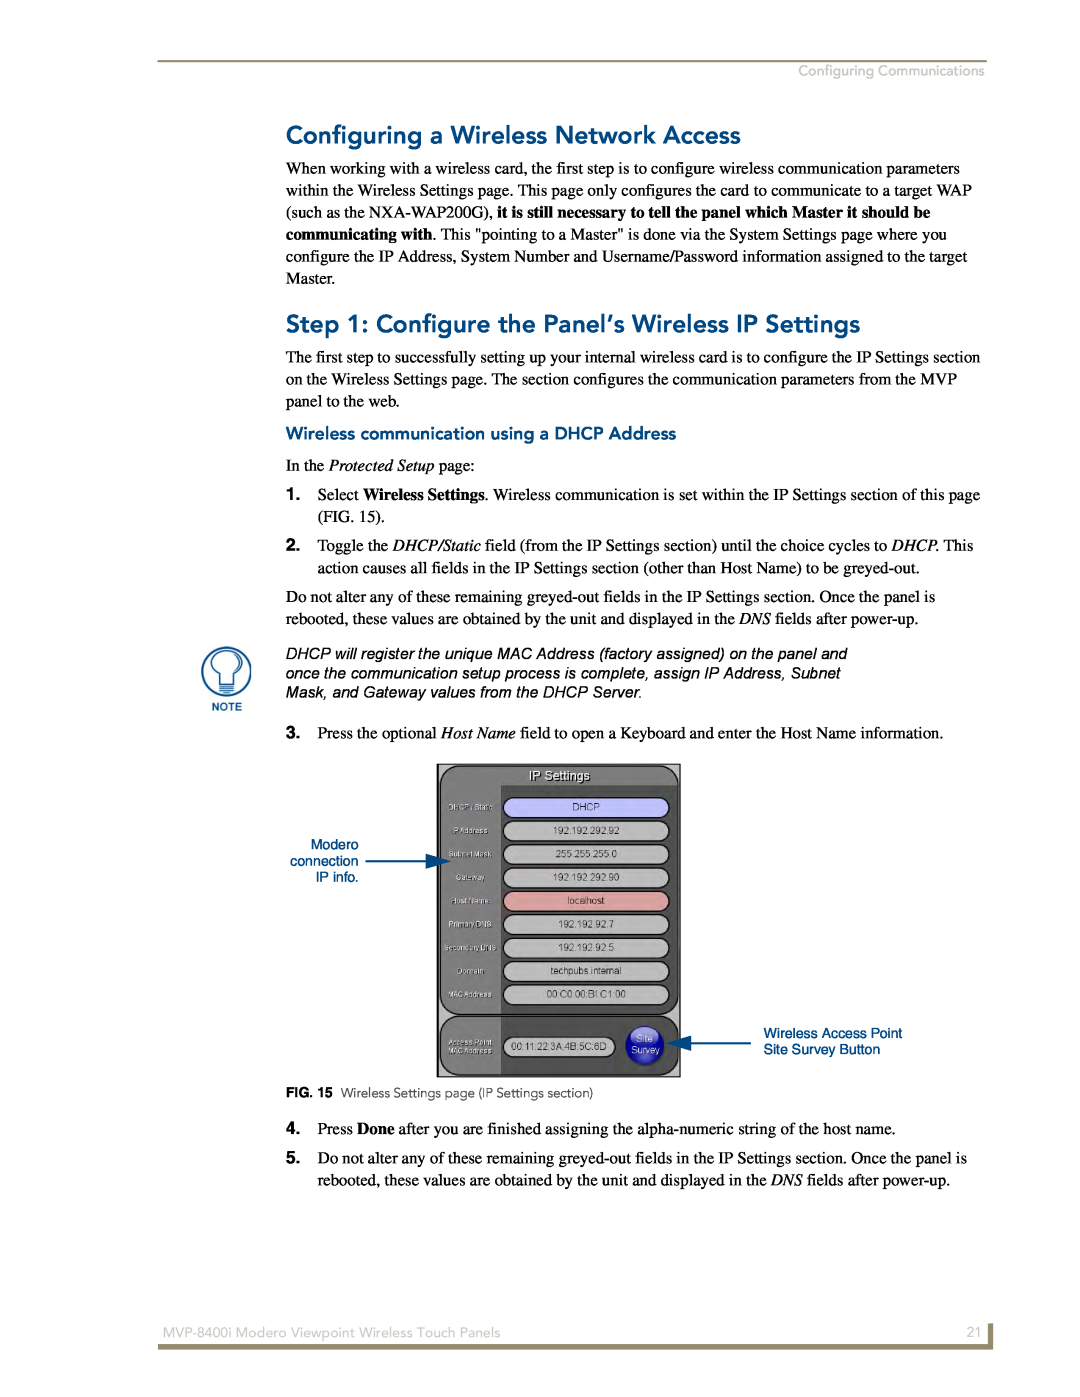 AMX MVP-8400i manual Configuring a Wireless Network Access, Configure the Panel’s Wireless IP Settings 